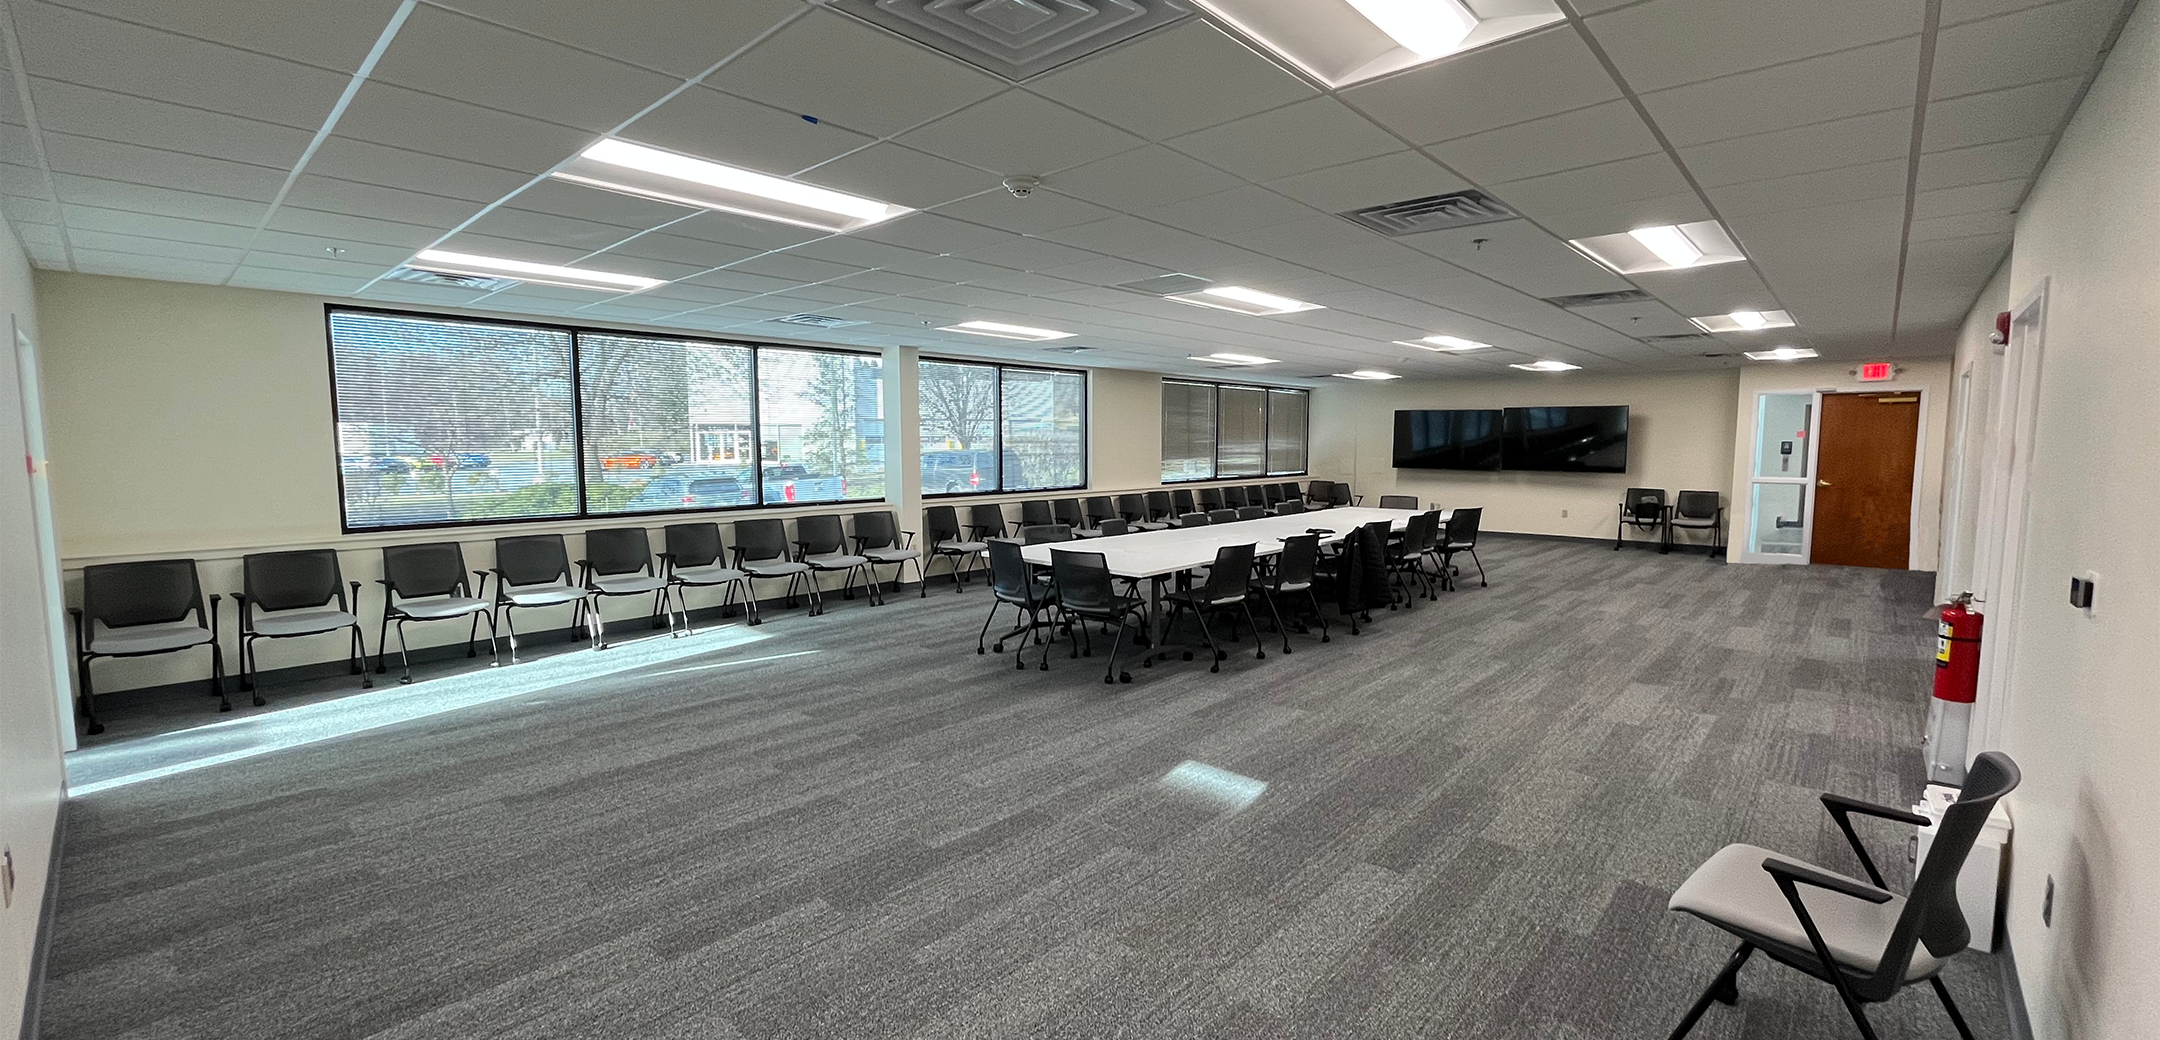 An interior view of the PA Leadership Charter School meeting room with carpet flooring and panel ceiling with a meeting table and chairs in the center.